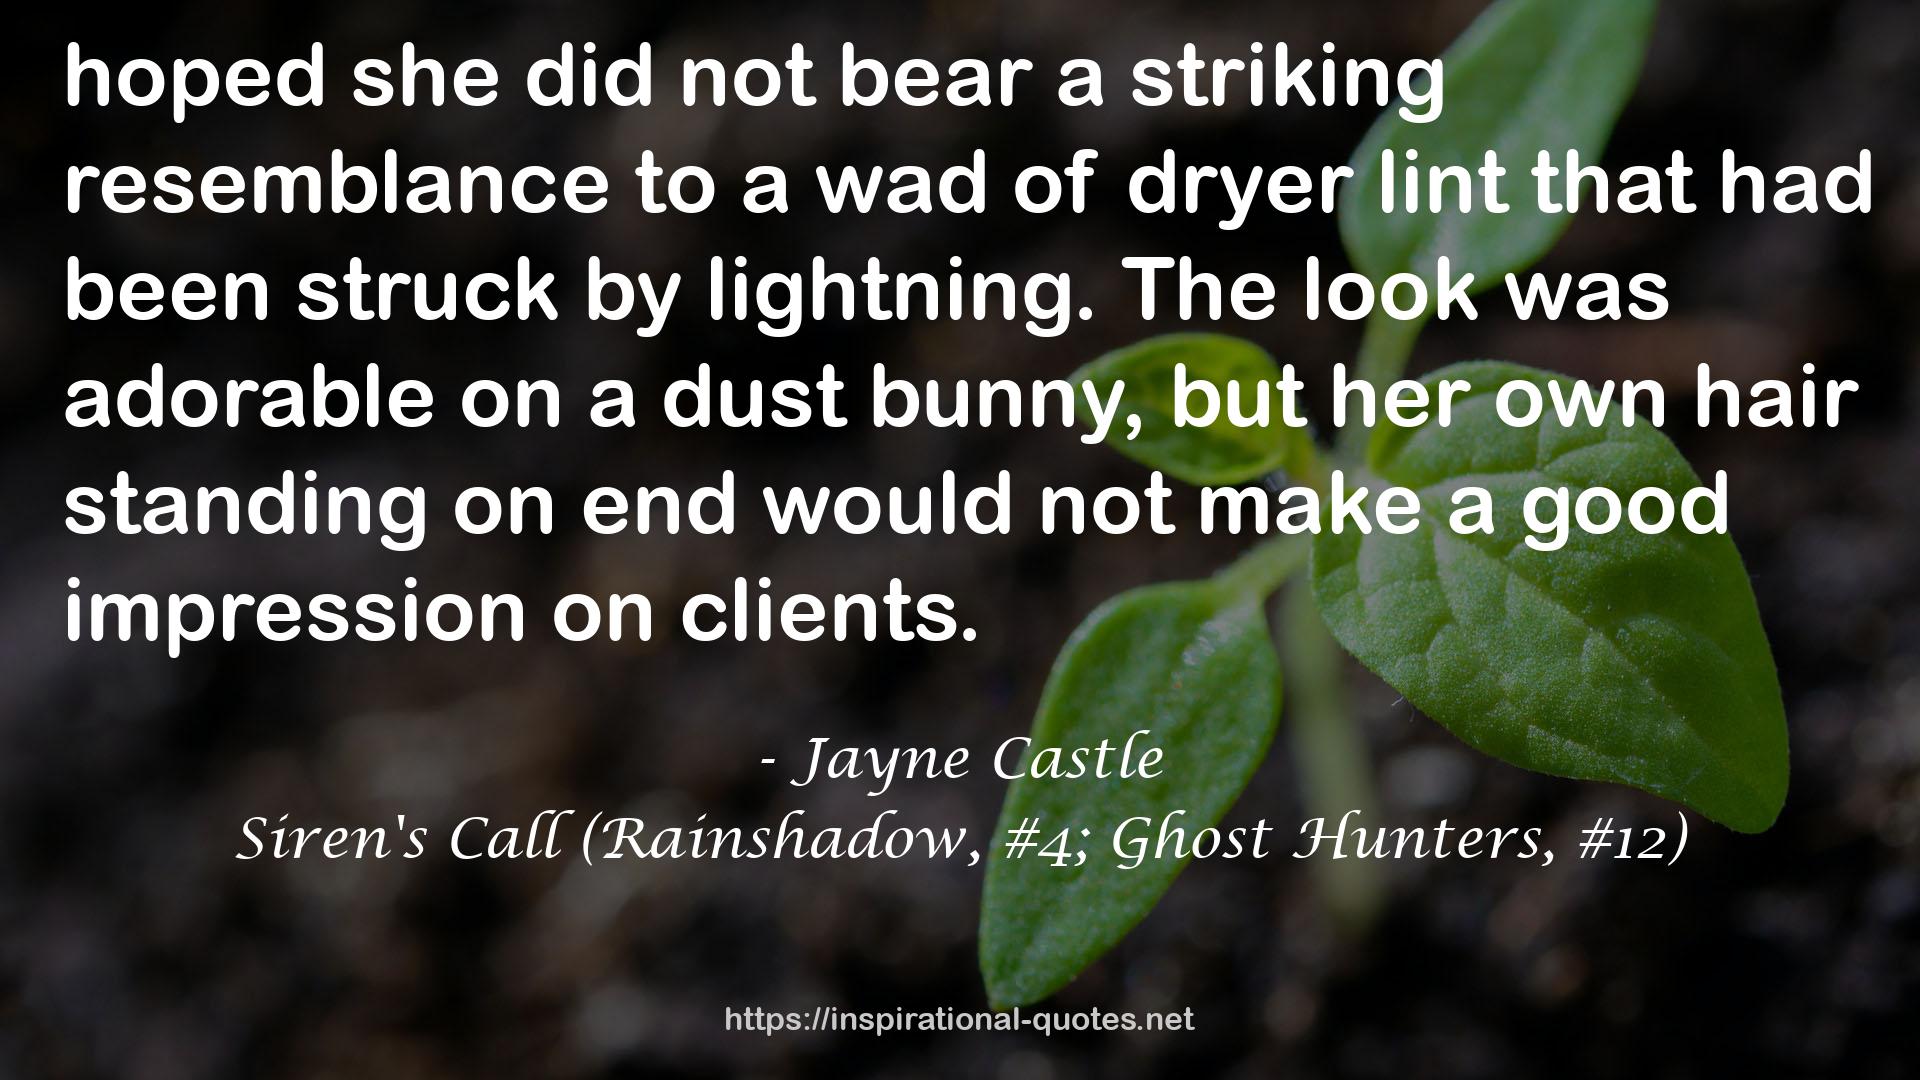 Siren's Call (Rainshadow, #4; Ghost Hunters, #12) QUOTES